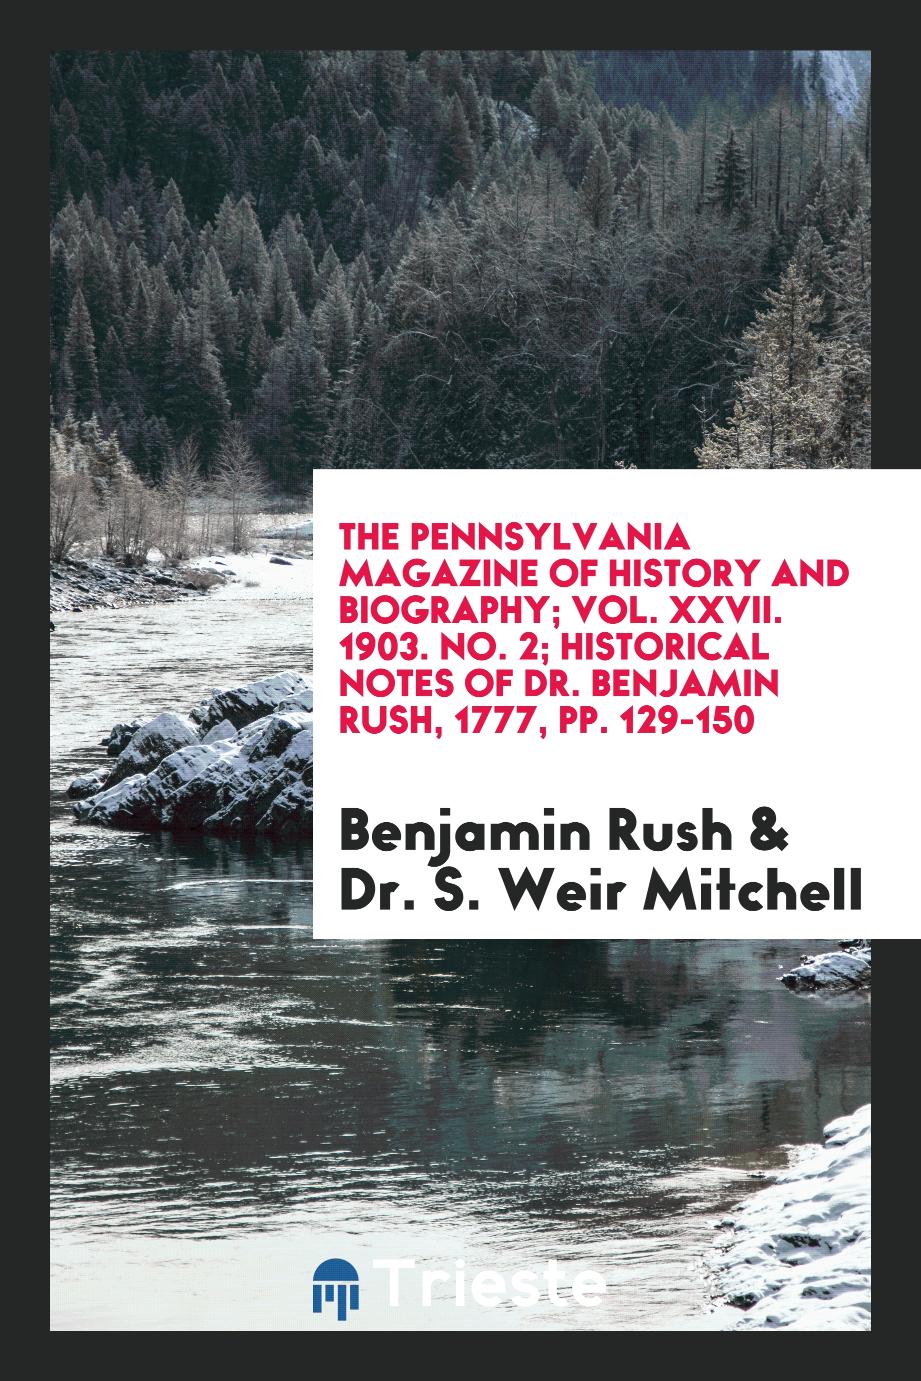 The Pennsylvania Magazine of History and Biography; Vol. XXVII. 1903. No. 2; Historical Notes of Dr. Benjamin Rush, 1777, pp. 129-150